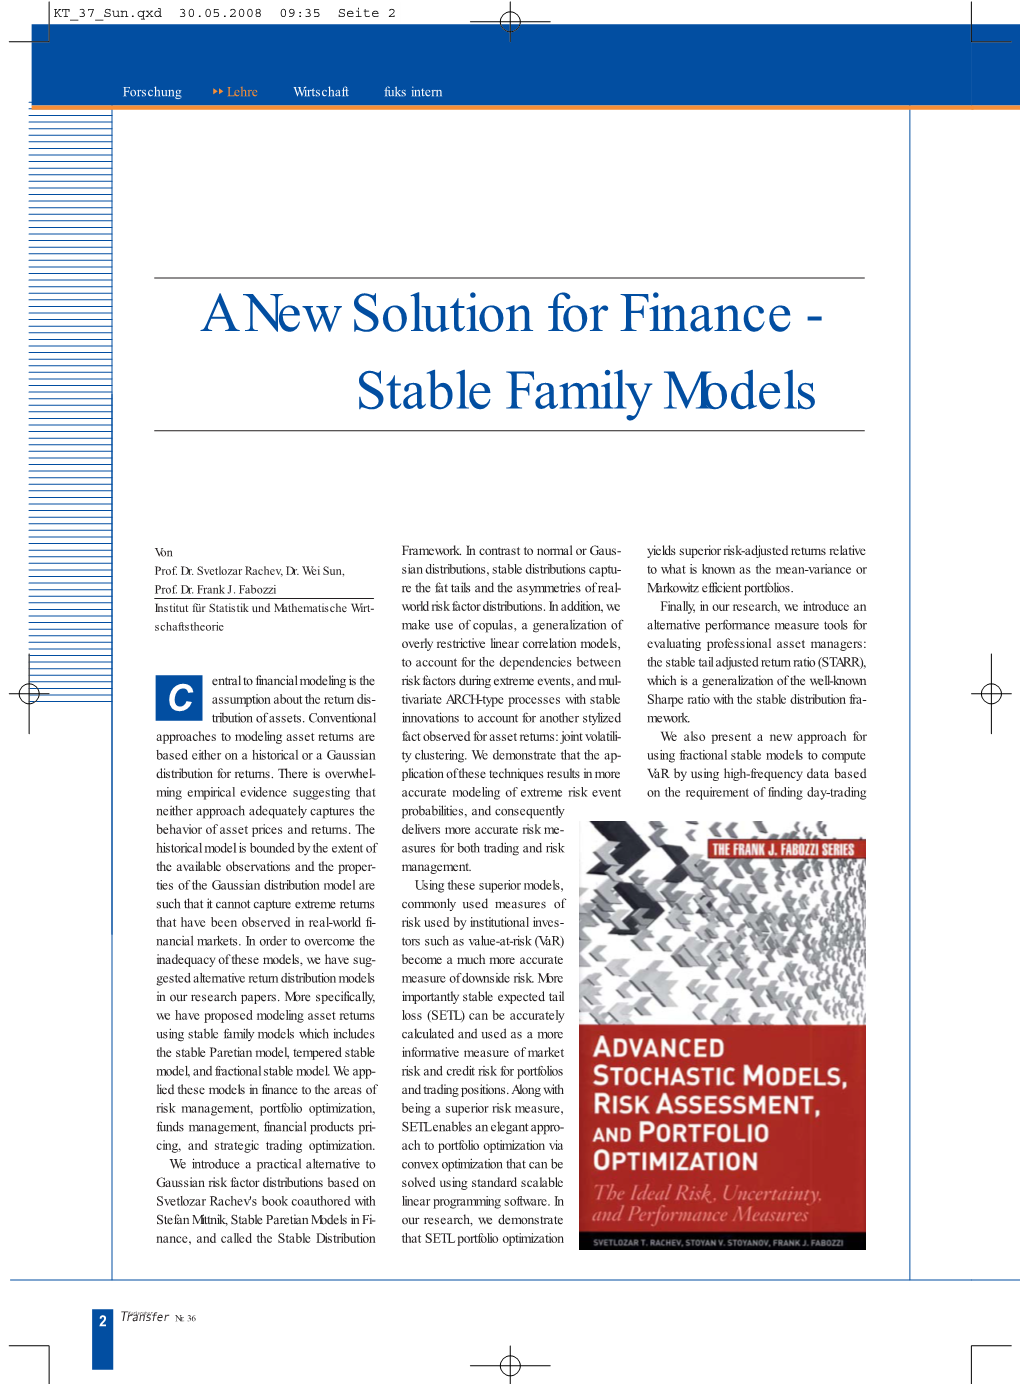 A New Solution for Finance - Stable Family Models